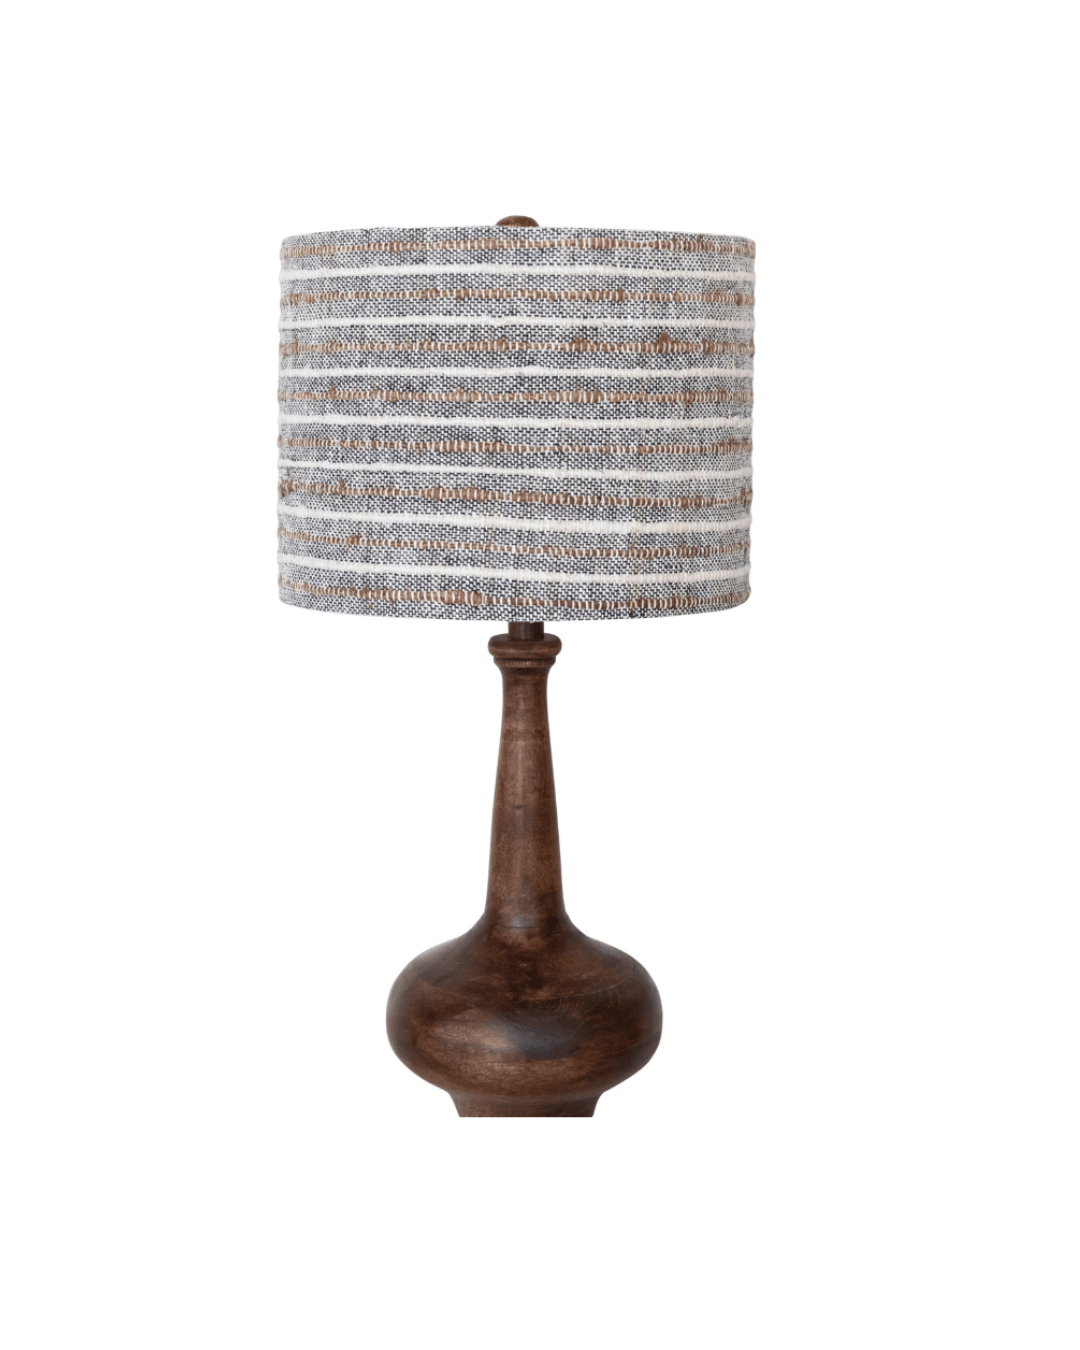 A Creative Co-op Mango Table Lamp with a rounded, stained finish base and a cylindrical woven cotton linen shade. The lampshade features alternating horizontal stripes in various shades of beige and gray, adding texture to the plain white background.